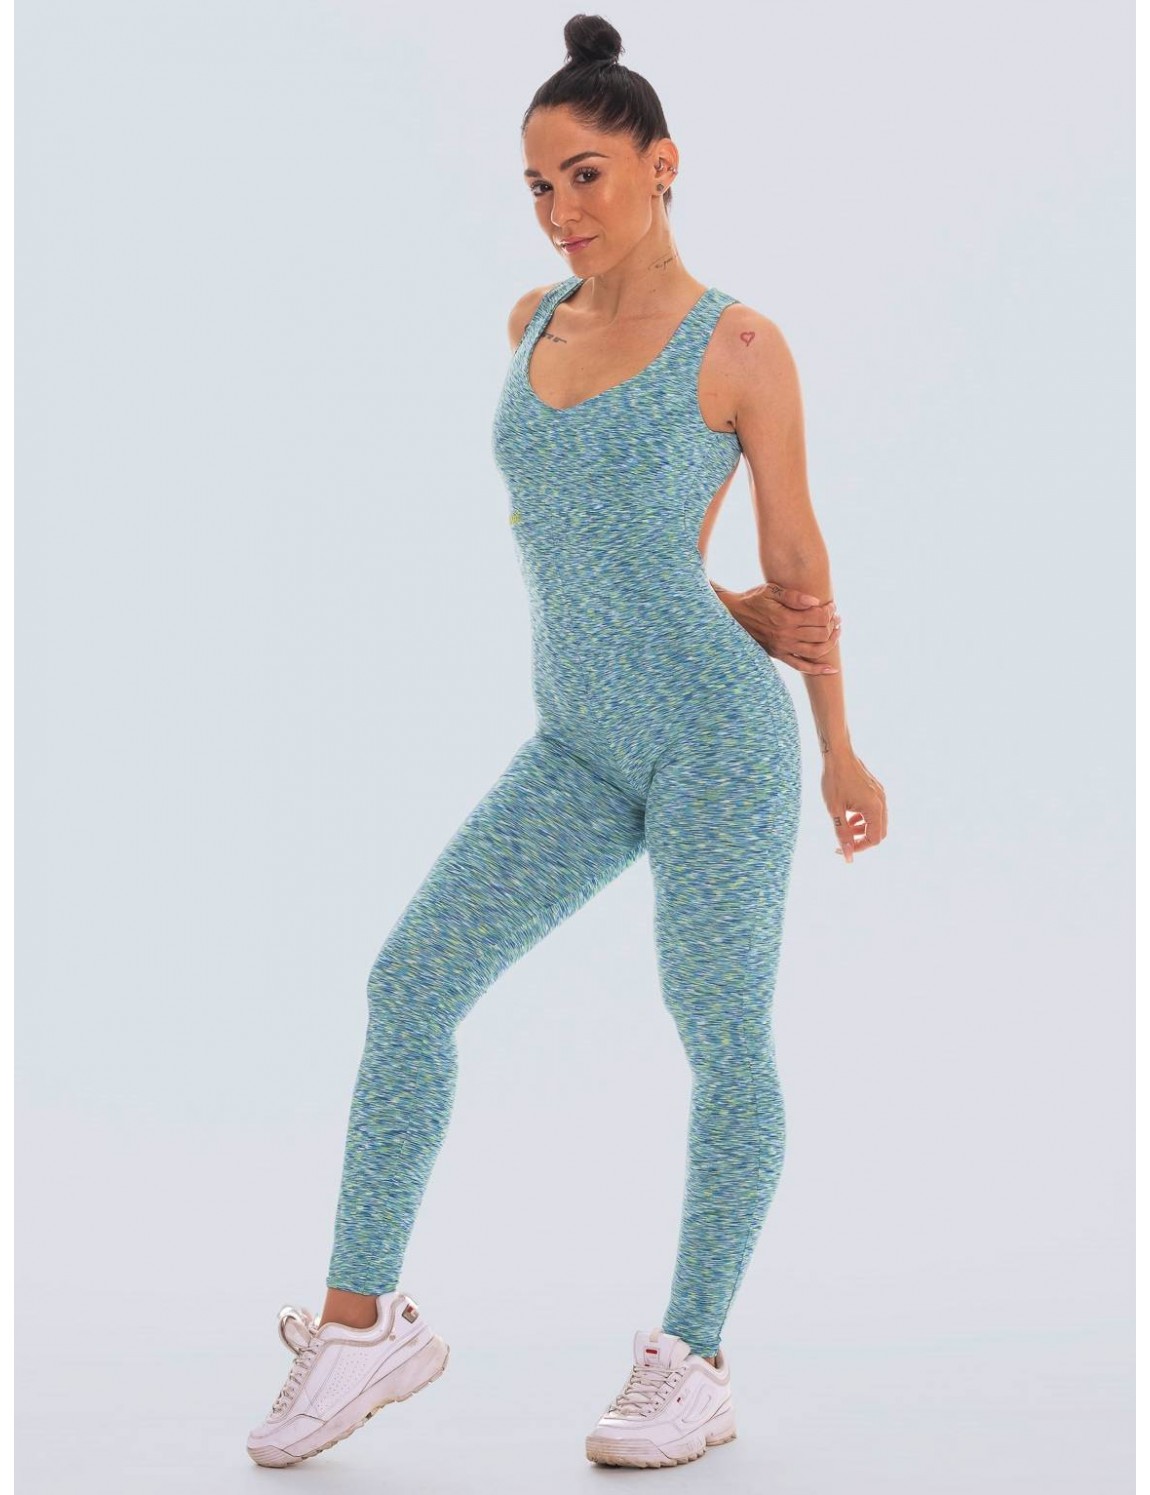 Colorful aquamarine lycra jumpsuit for dance and sports